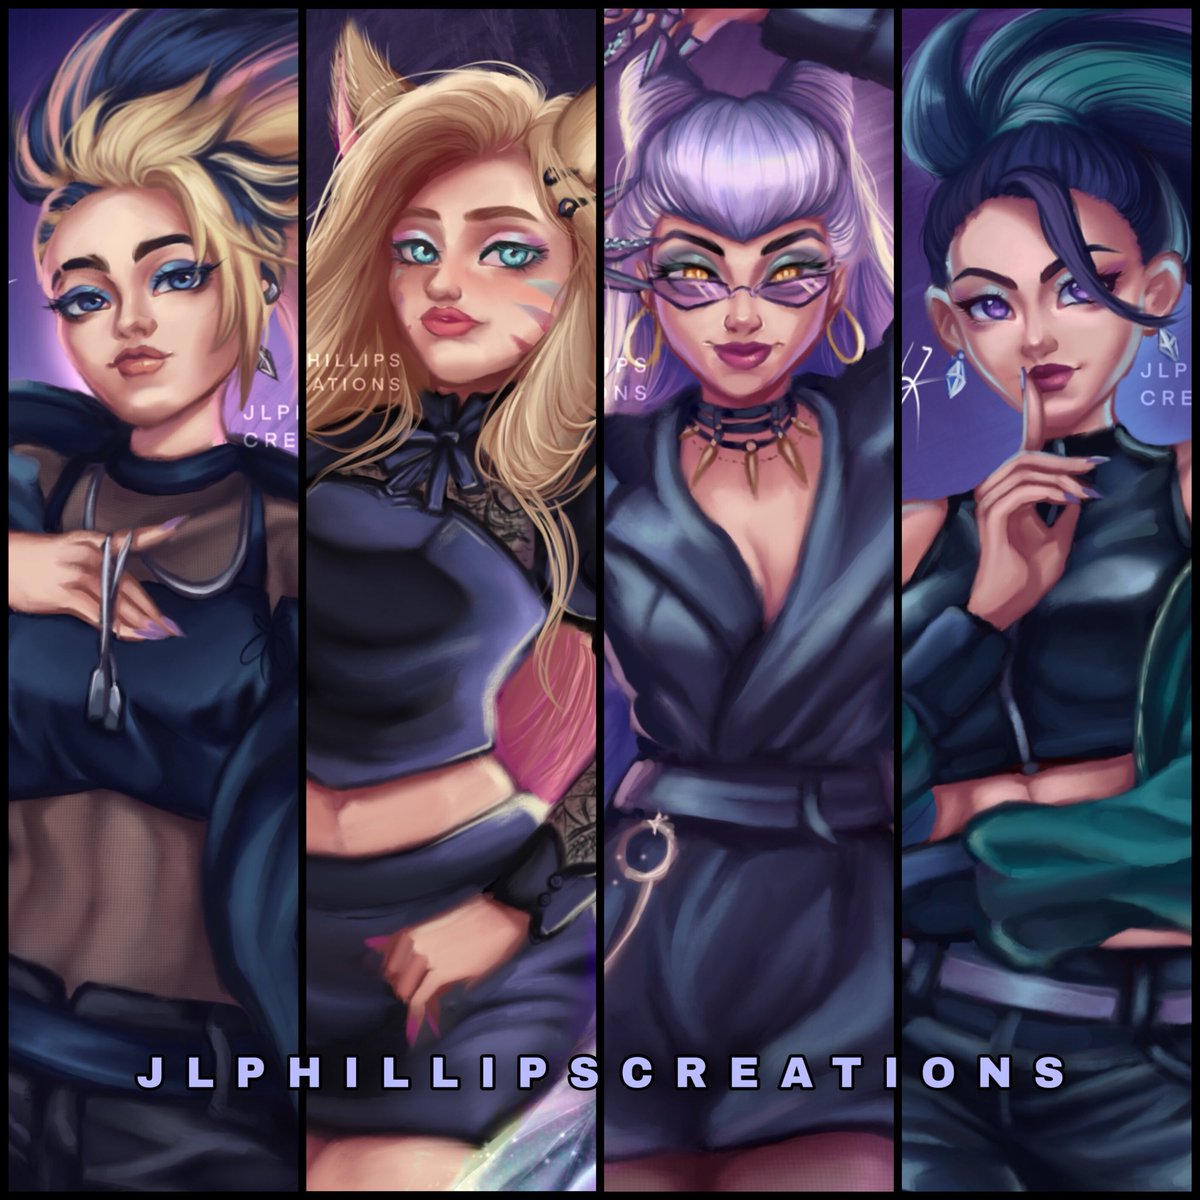 I’ll go first! Hello I am J.L.Phillips and I love drawing portraits and stylized art.